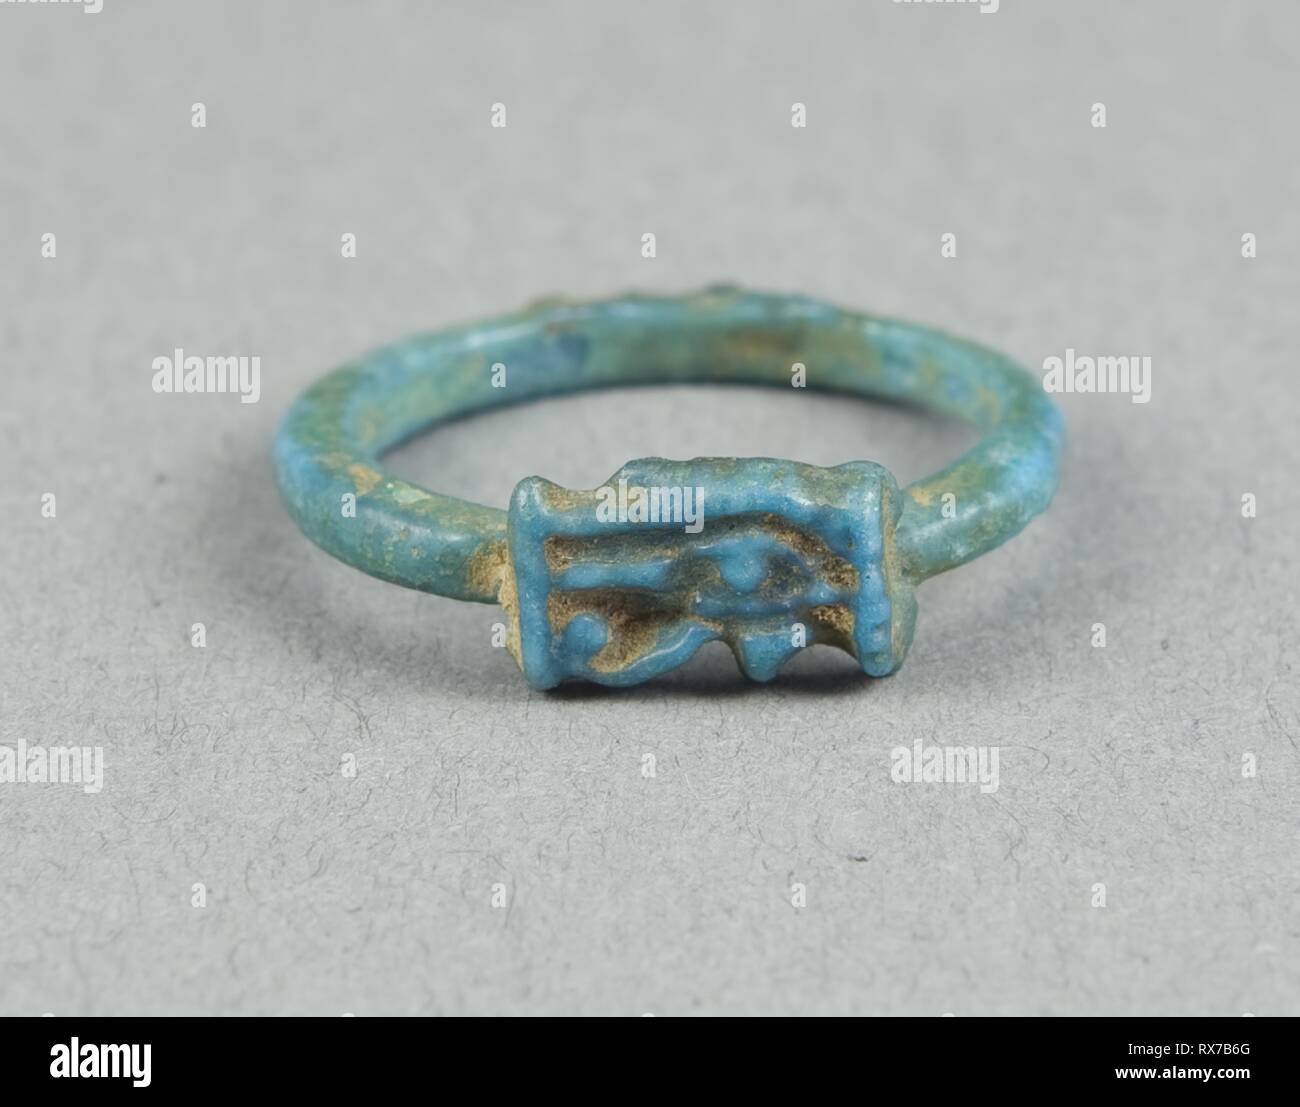 Ring: Udjat Eye. Egyptian. Date: 1325 BC. Dimensions: W. 0.6 cm (1/4 in.); diam. 2.1 cm (13/16 in.). Faience. Origin: Egypt. Museum: The Chicago Art Institute. Author: Ancient Egyptian. Stock Photo